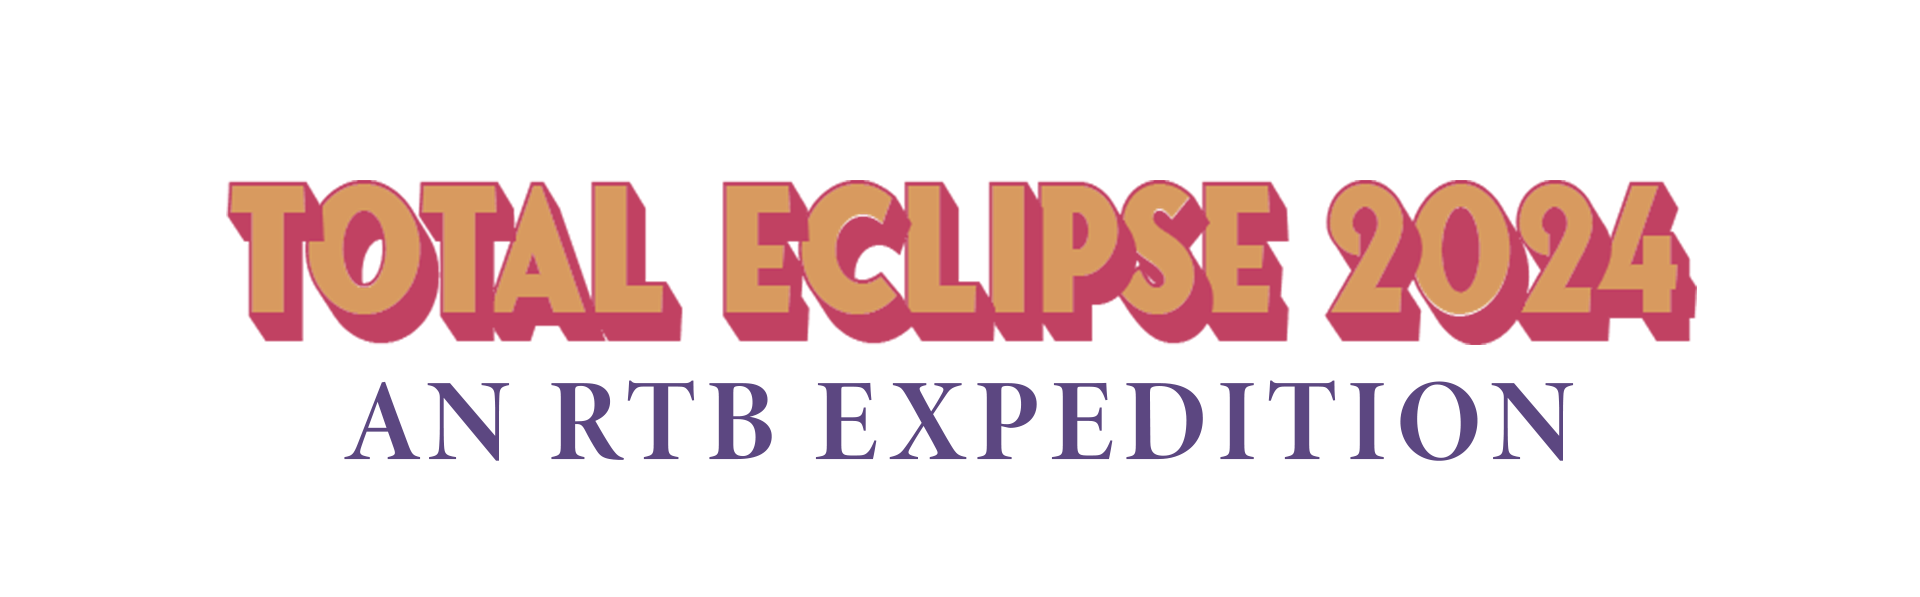 Solar Eclipse 2024 Expedition 